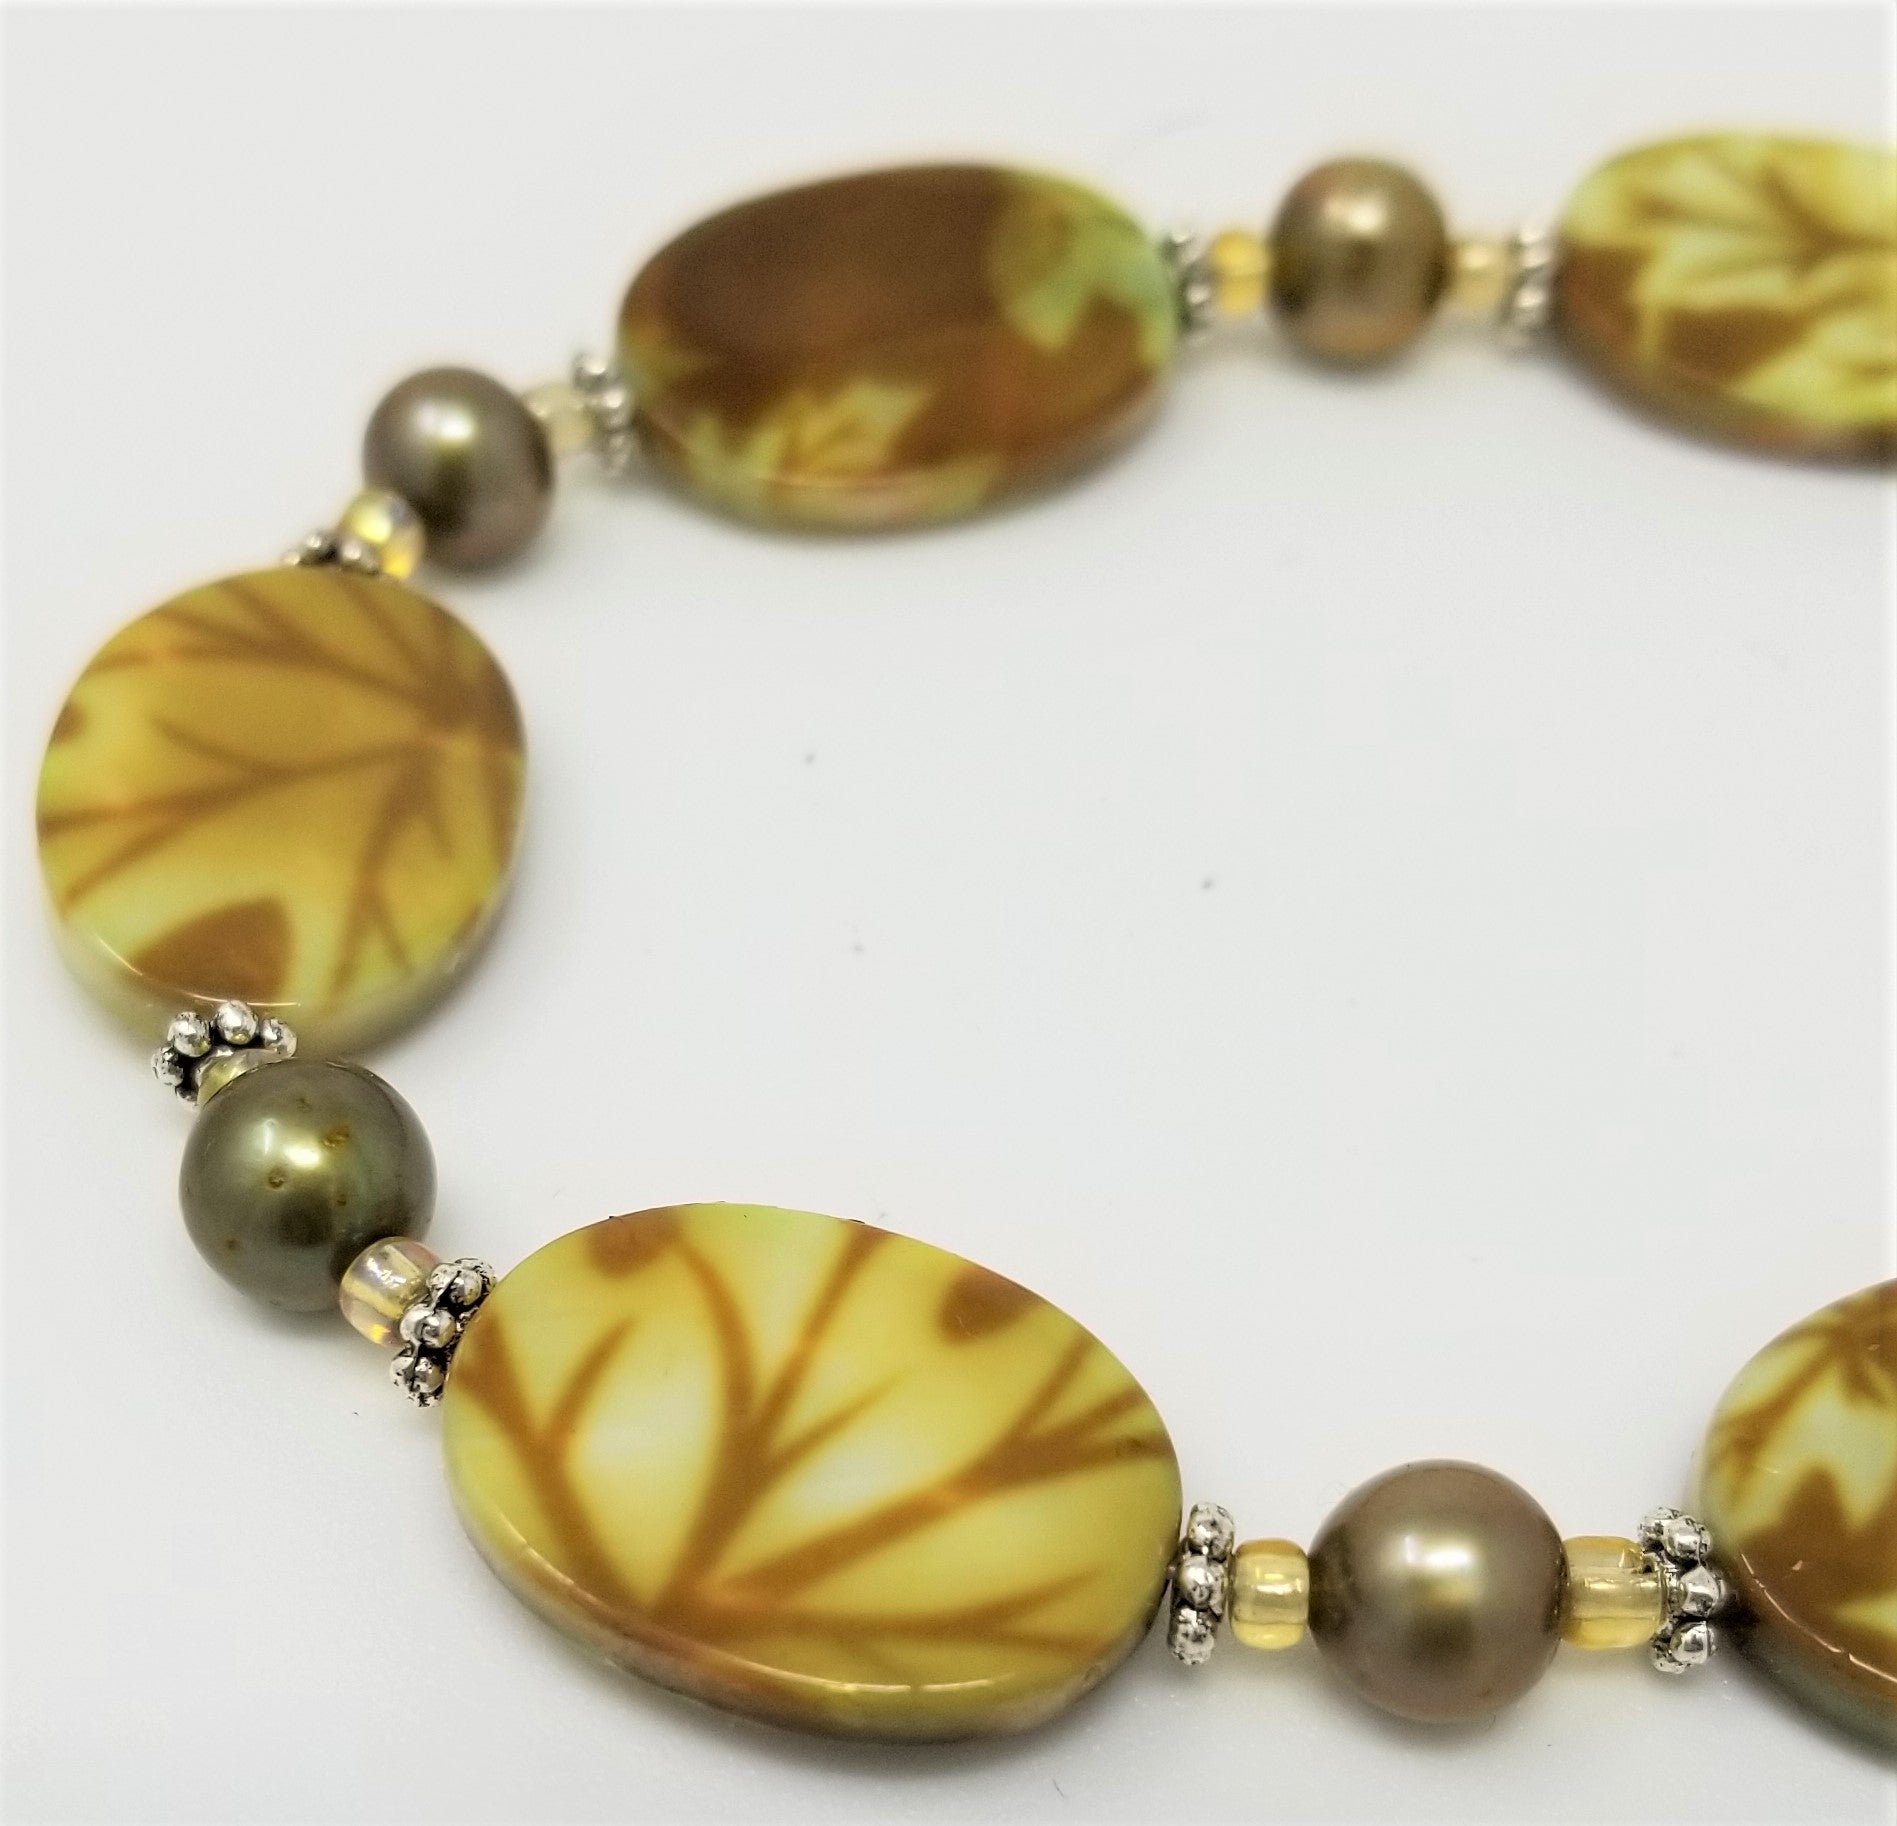 Pearl and Mother of Pearl Handmade Bracelet